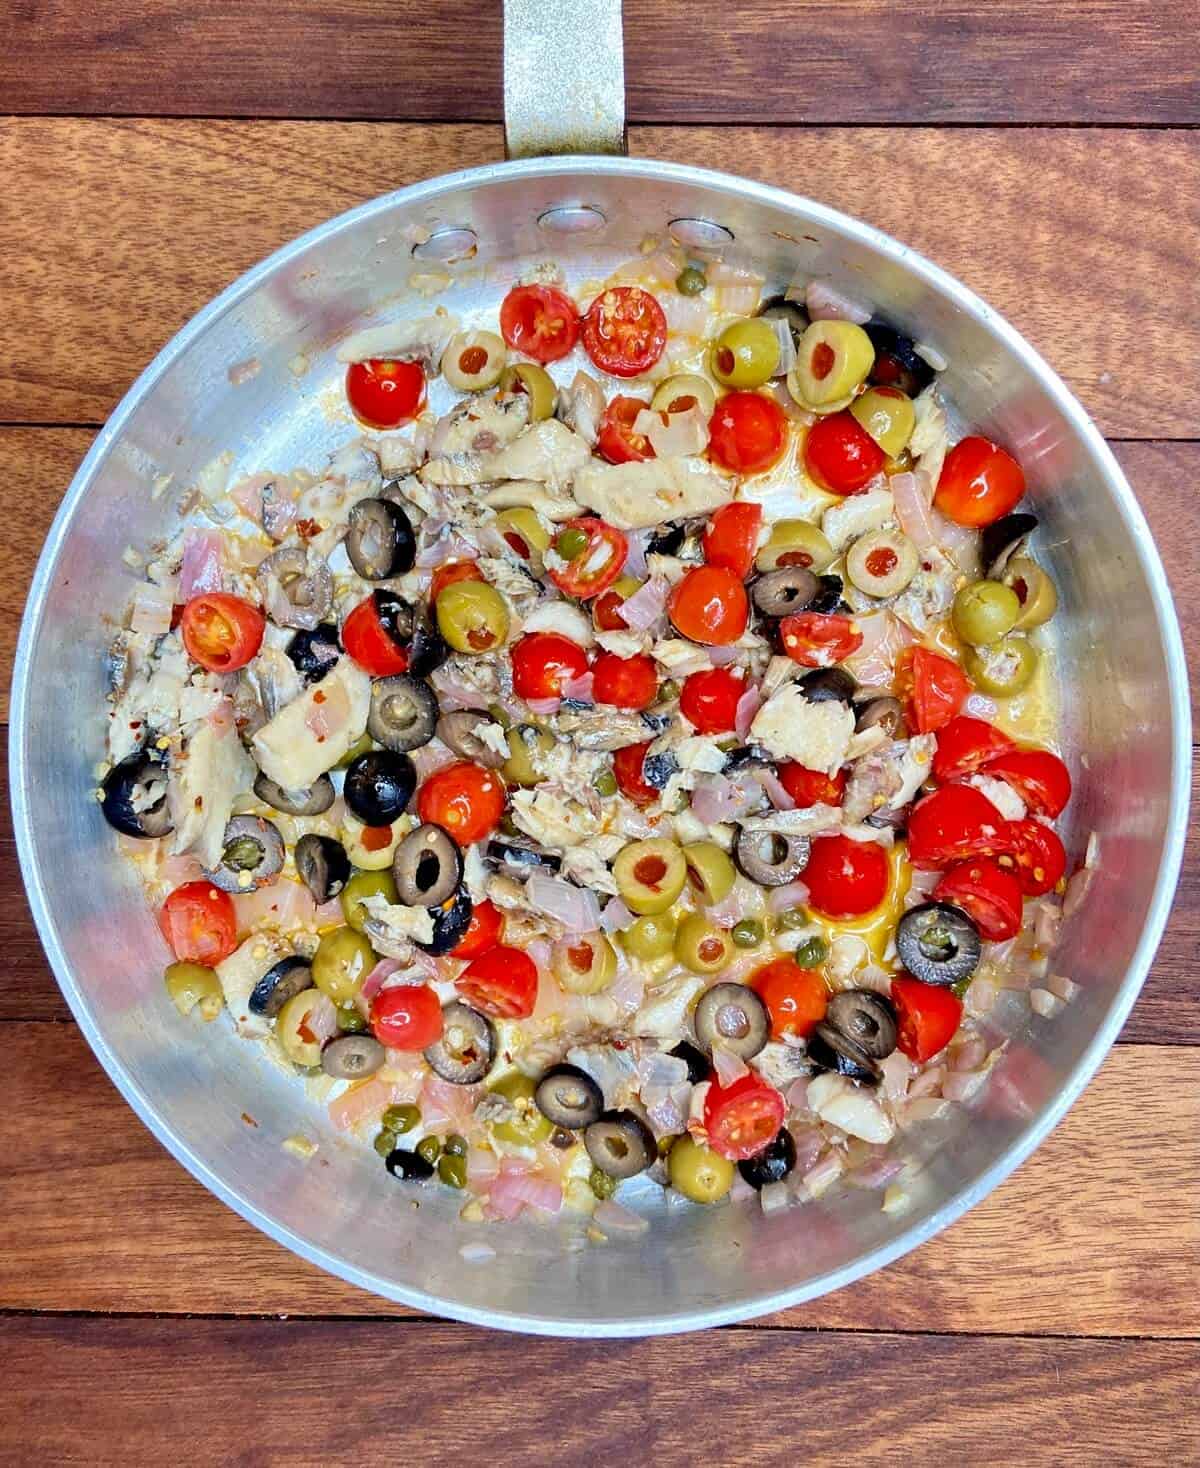 Cooking tomatoes, olives, capers, lemon juice, pepper flakes, and sardines.